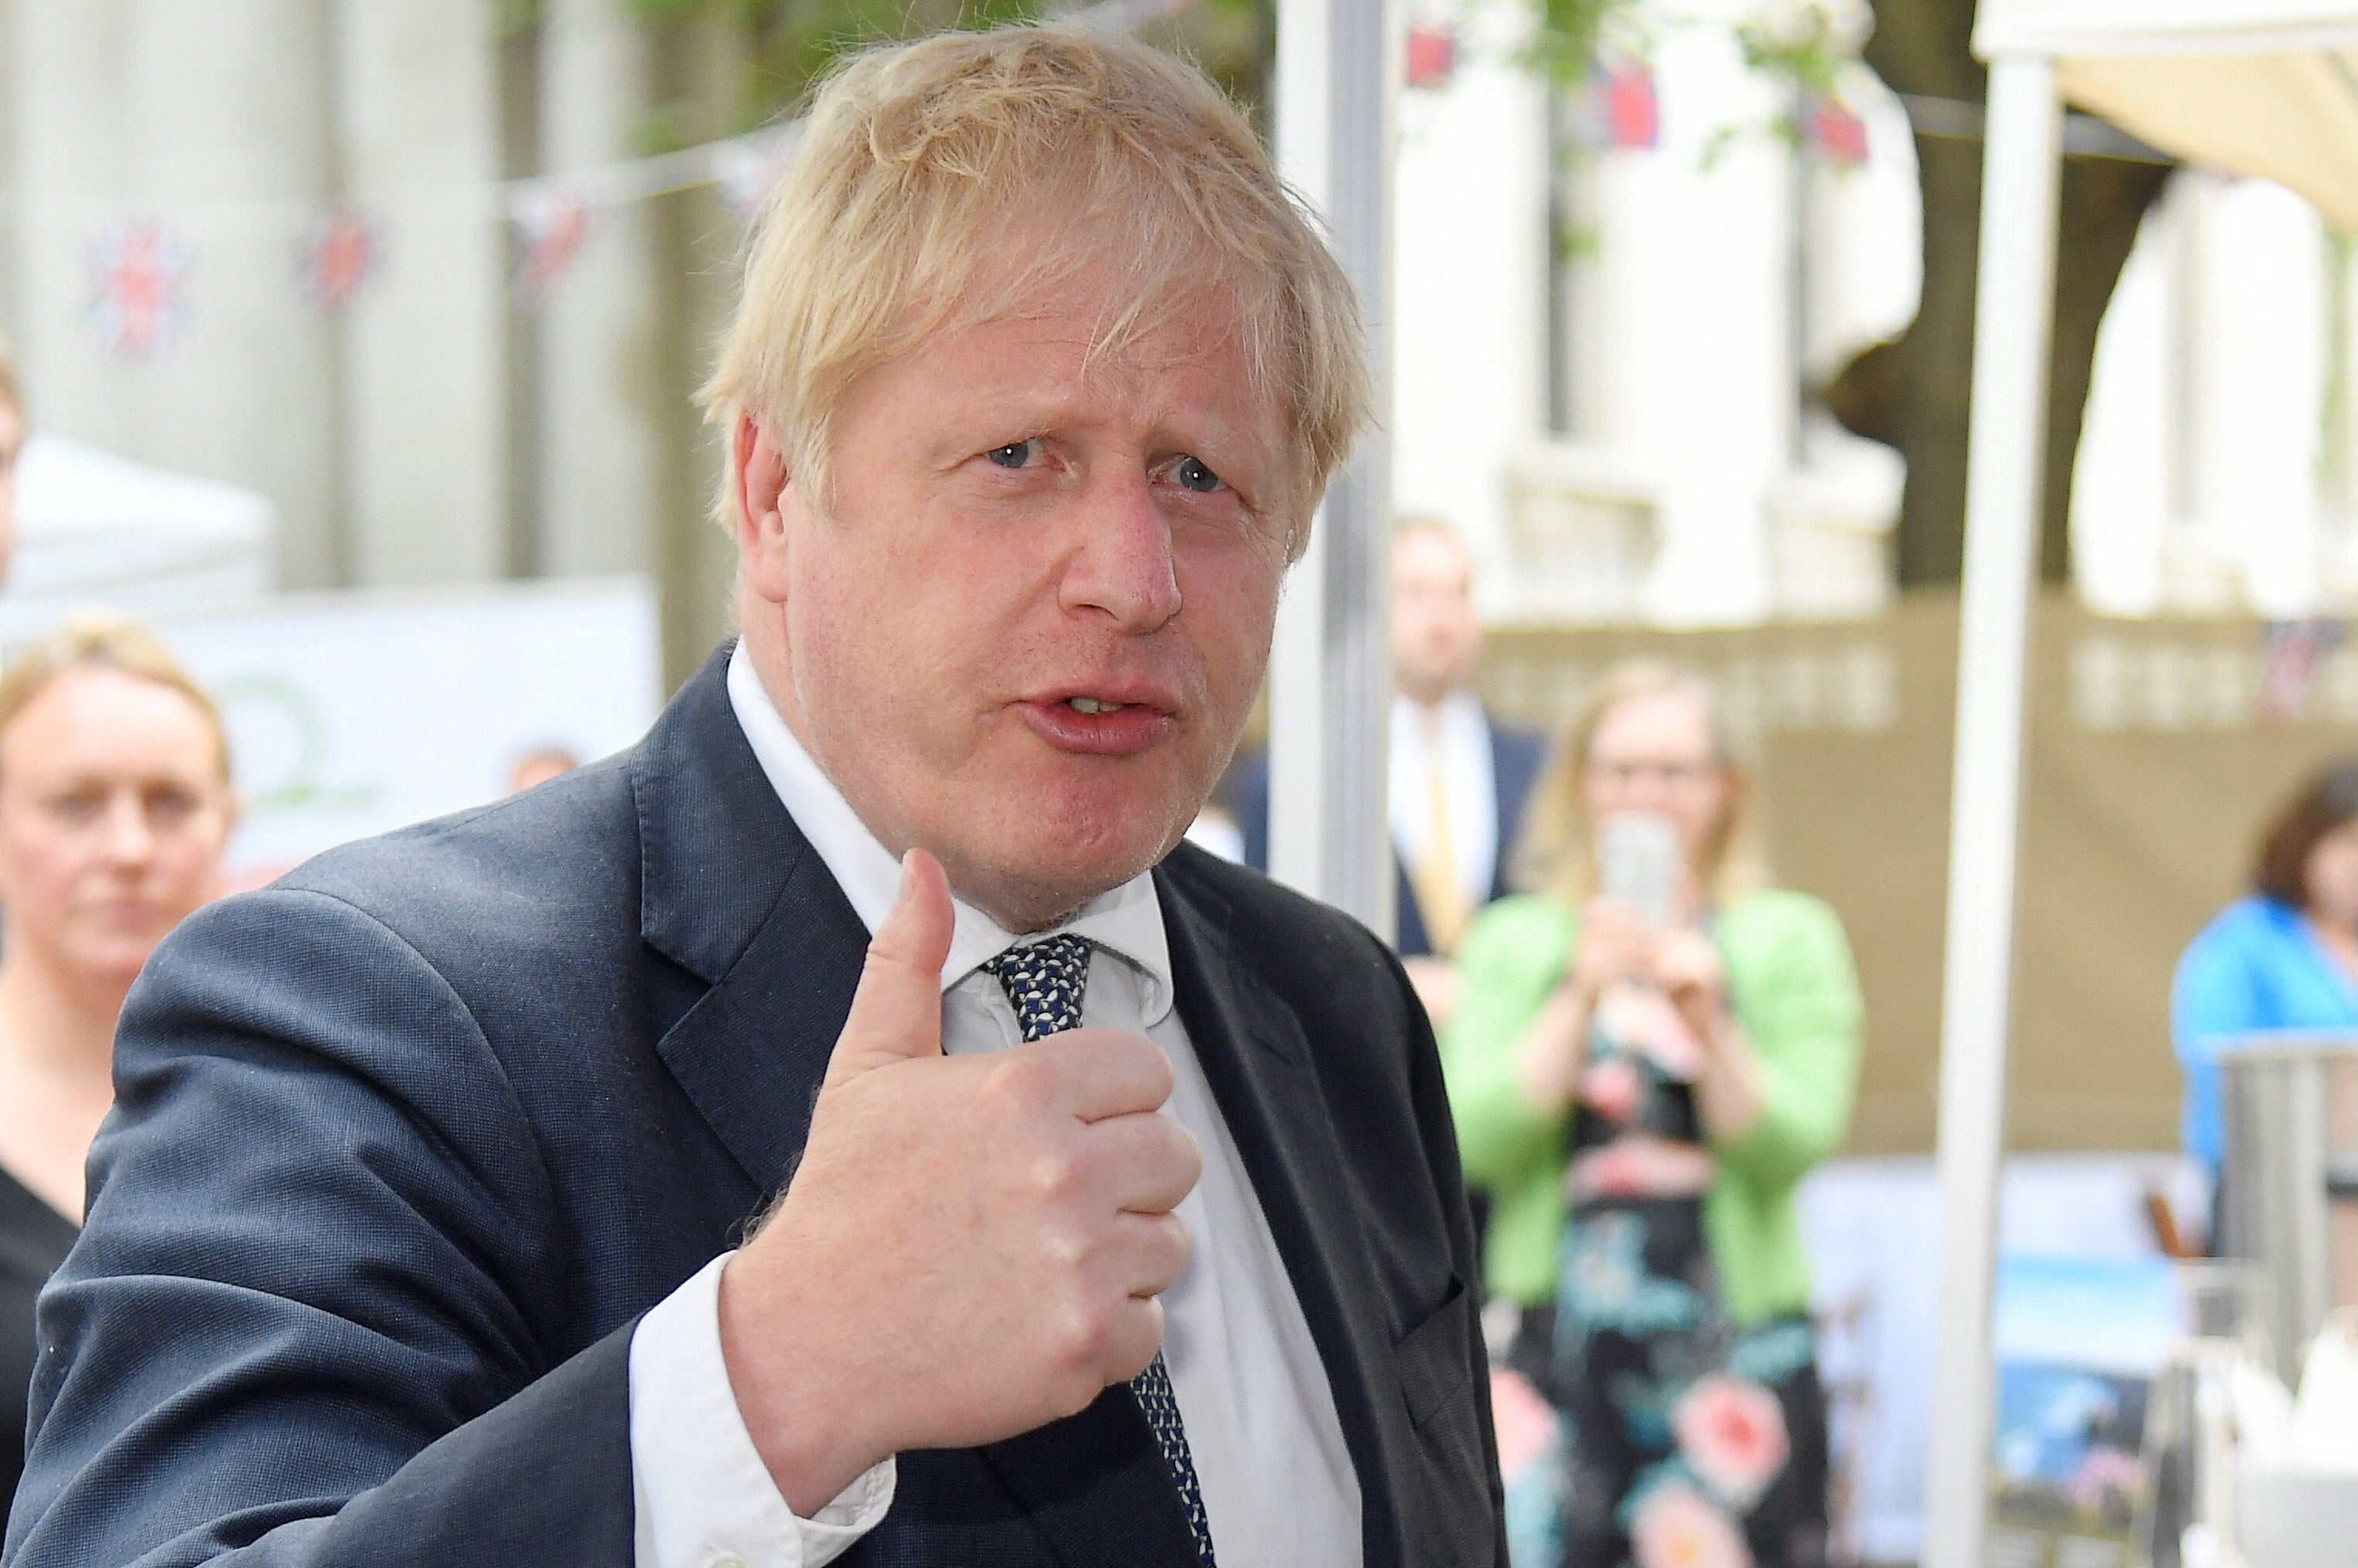 Communities Secretary Michael Gove said it is “bonkeroony” to suggest Boris Johnson should have to resign over lockdown parties in Downing Street (PA)